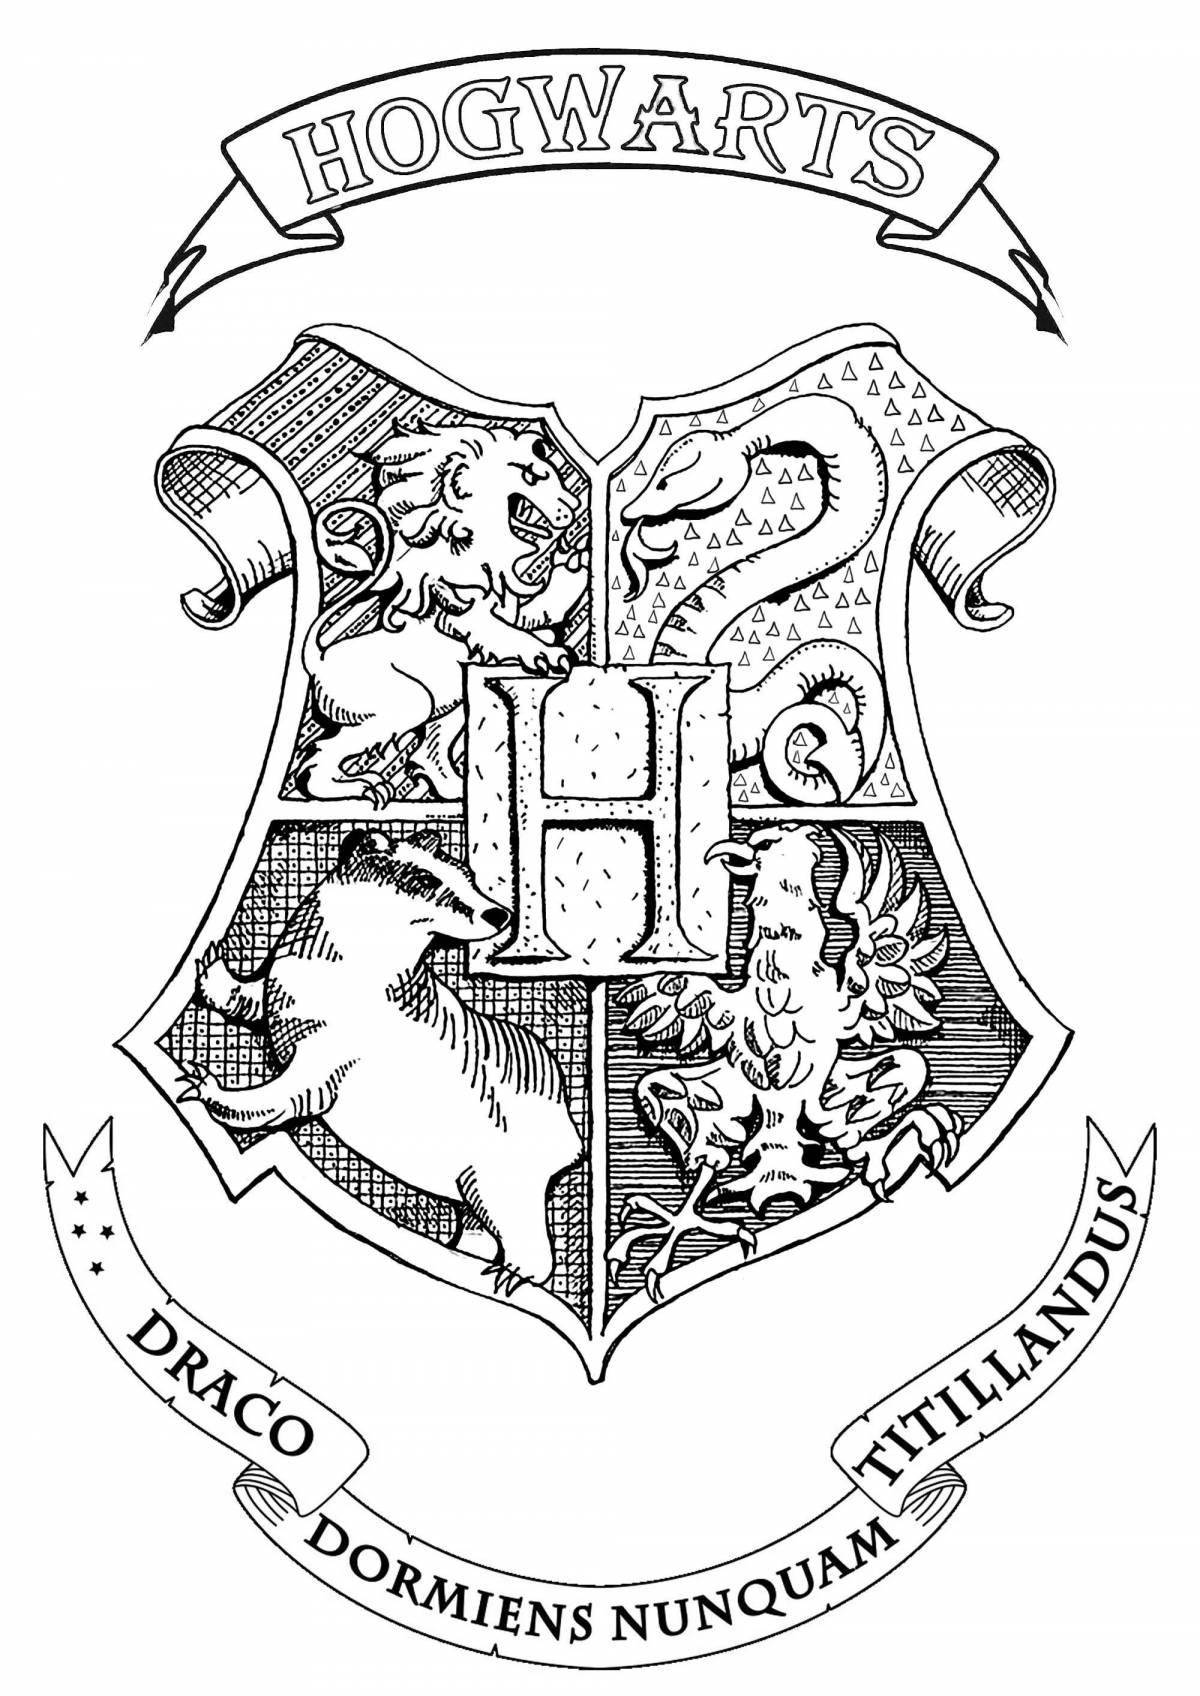 Coloring pages for imposing Hogwarts houses